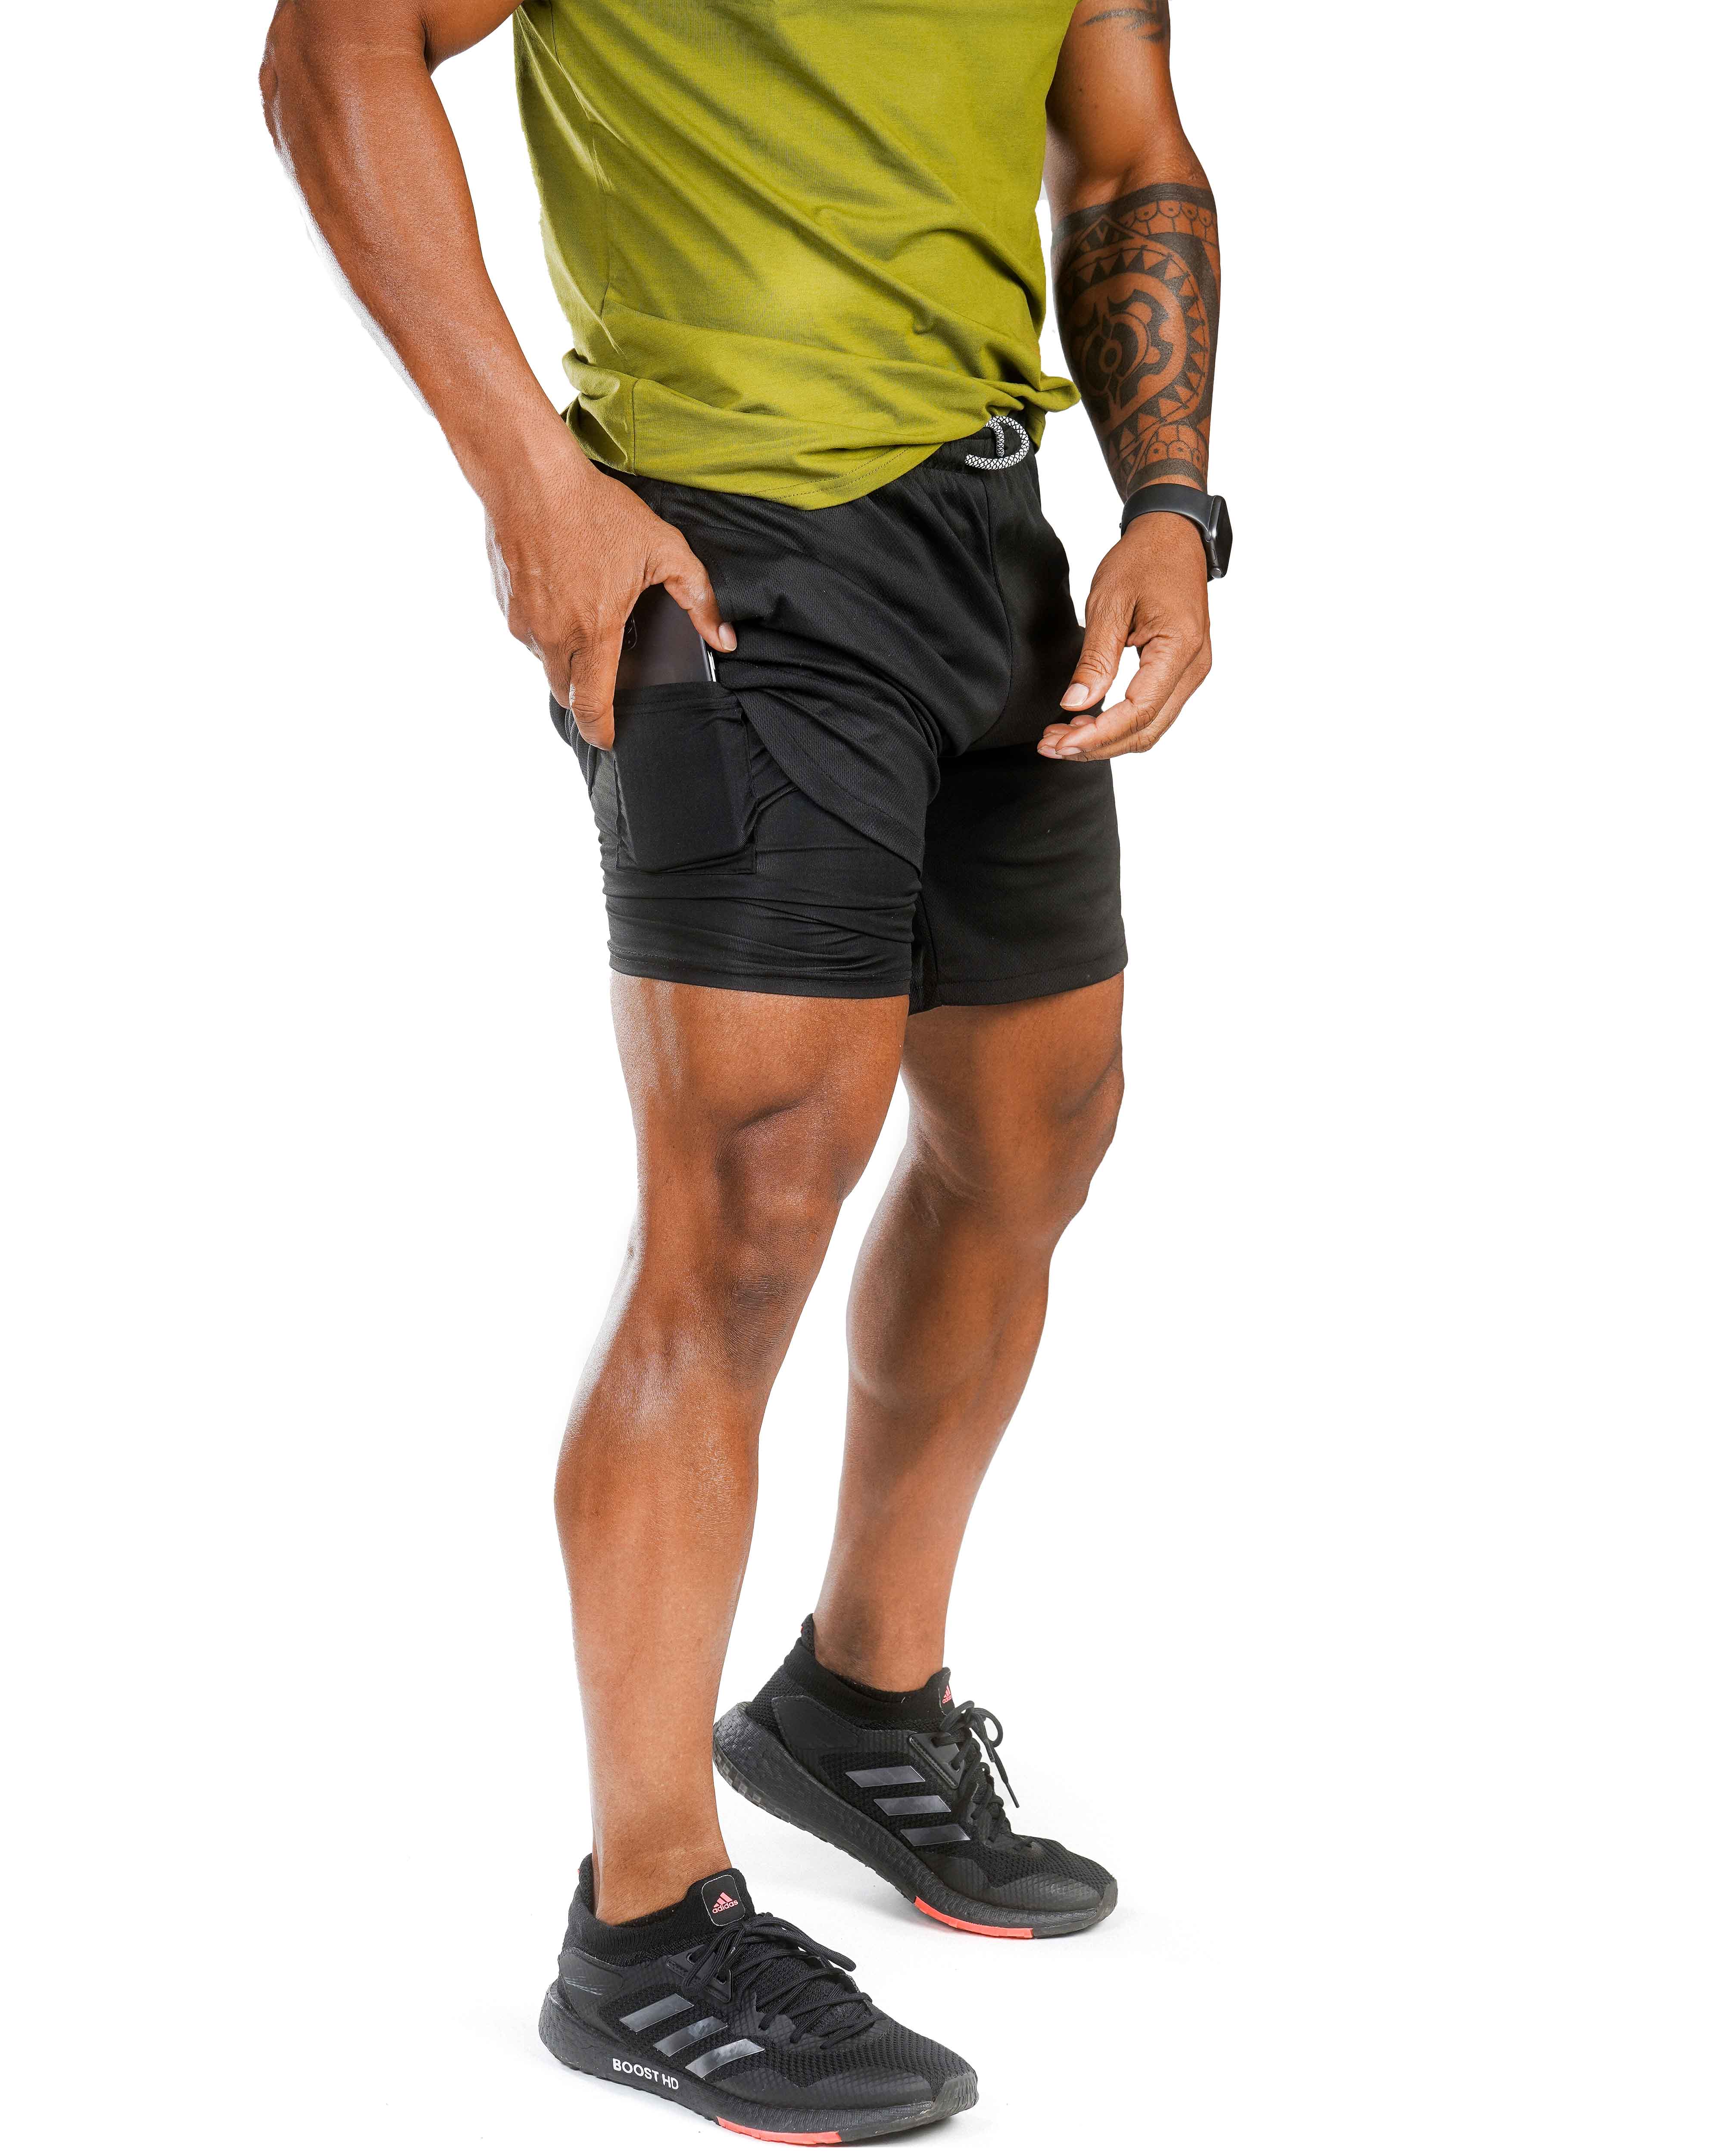 MEN'S SPORT SHORTS 2 IN ONE WITH PHONE POCKET (Run a size smaller) –  345activewear